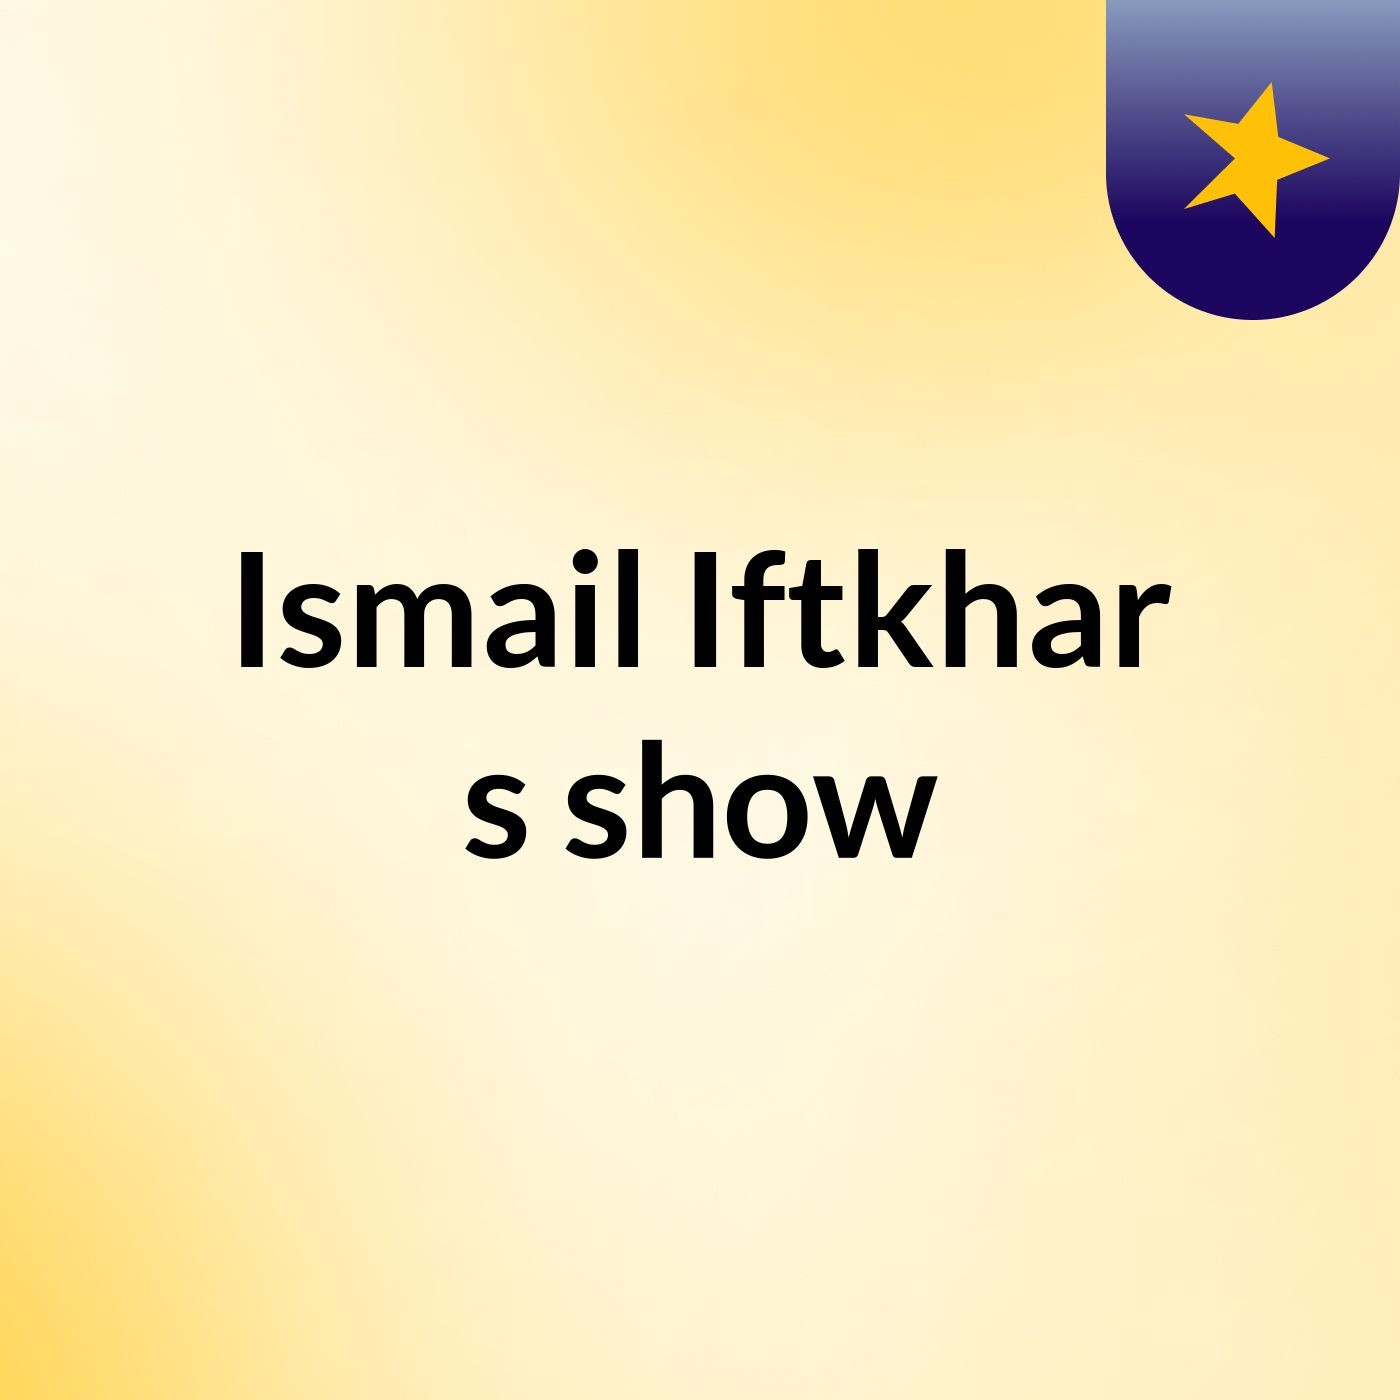 Ismail Iftkhar's show